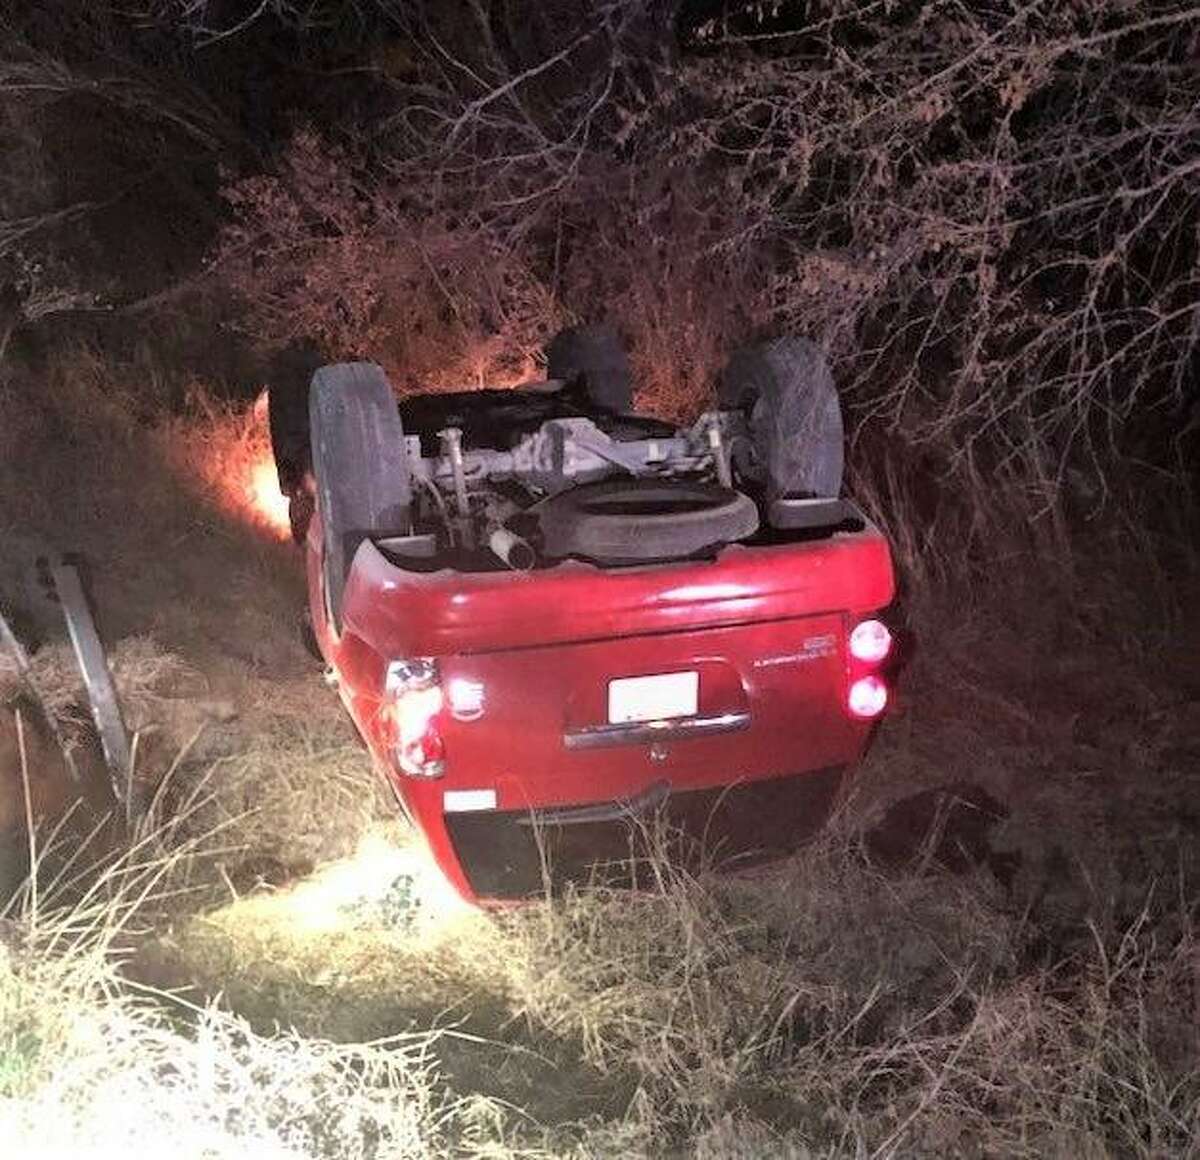 The driver of this vehicle allegedly lost control and rolled over. Authorities said this was a human smuggling attempt. The driver was not located.